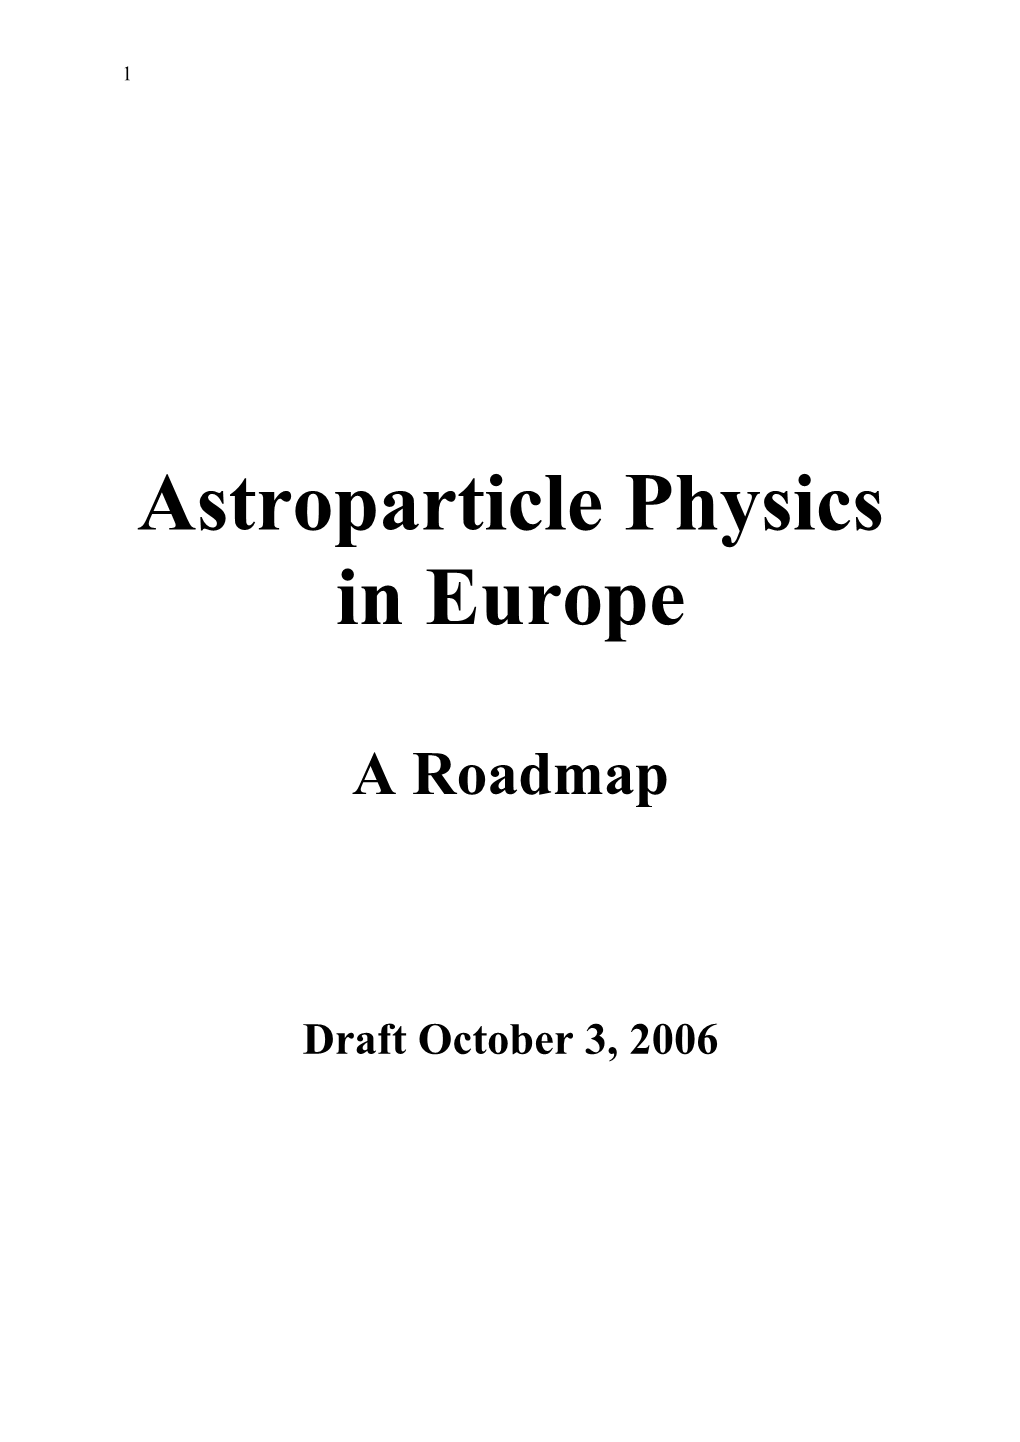 Astroparticle Physics in Europe